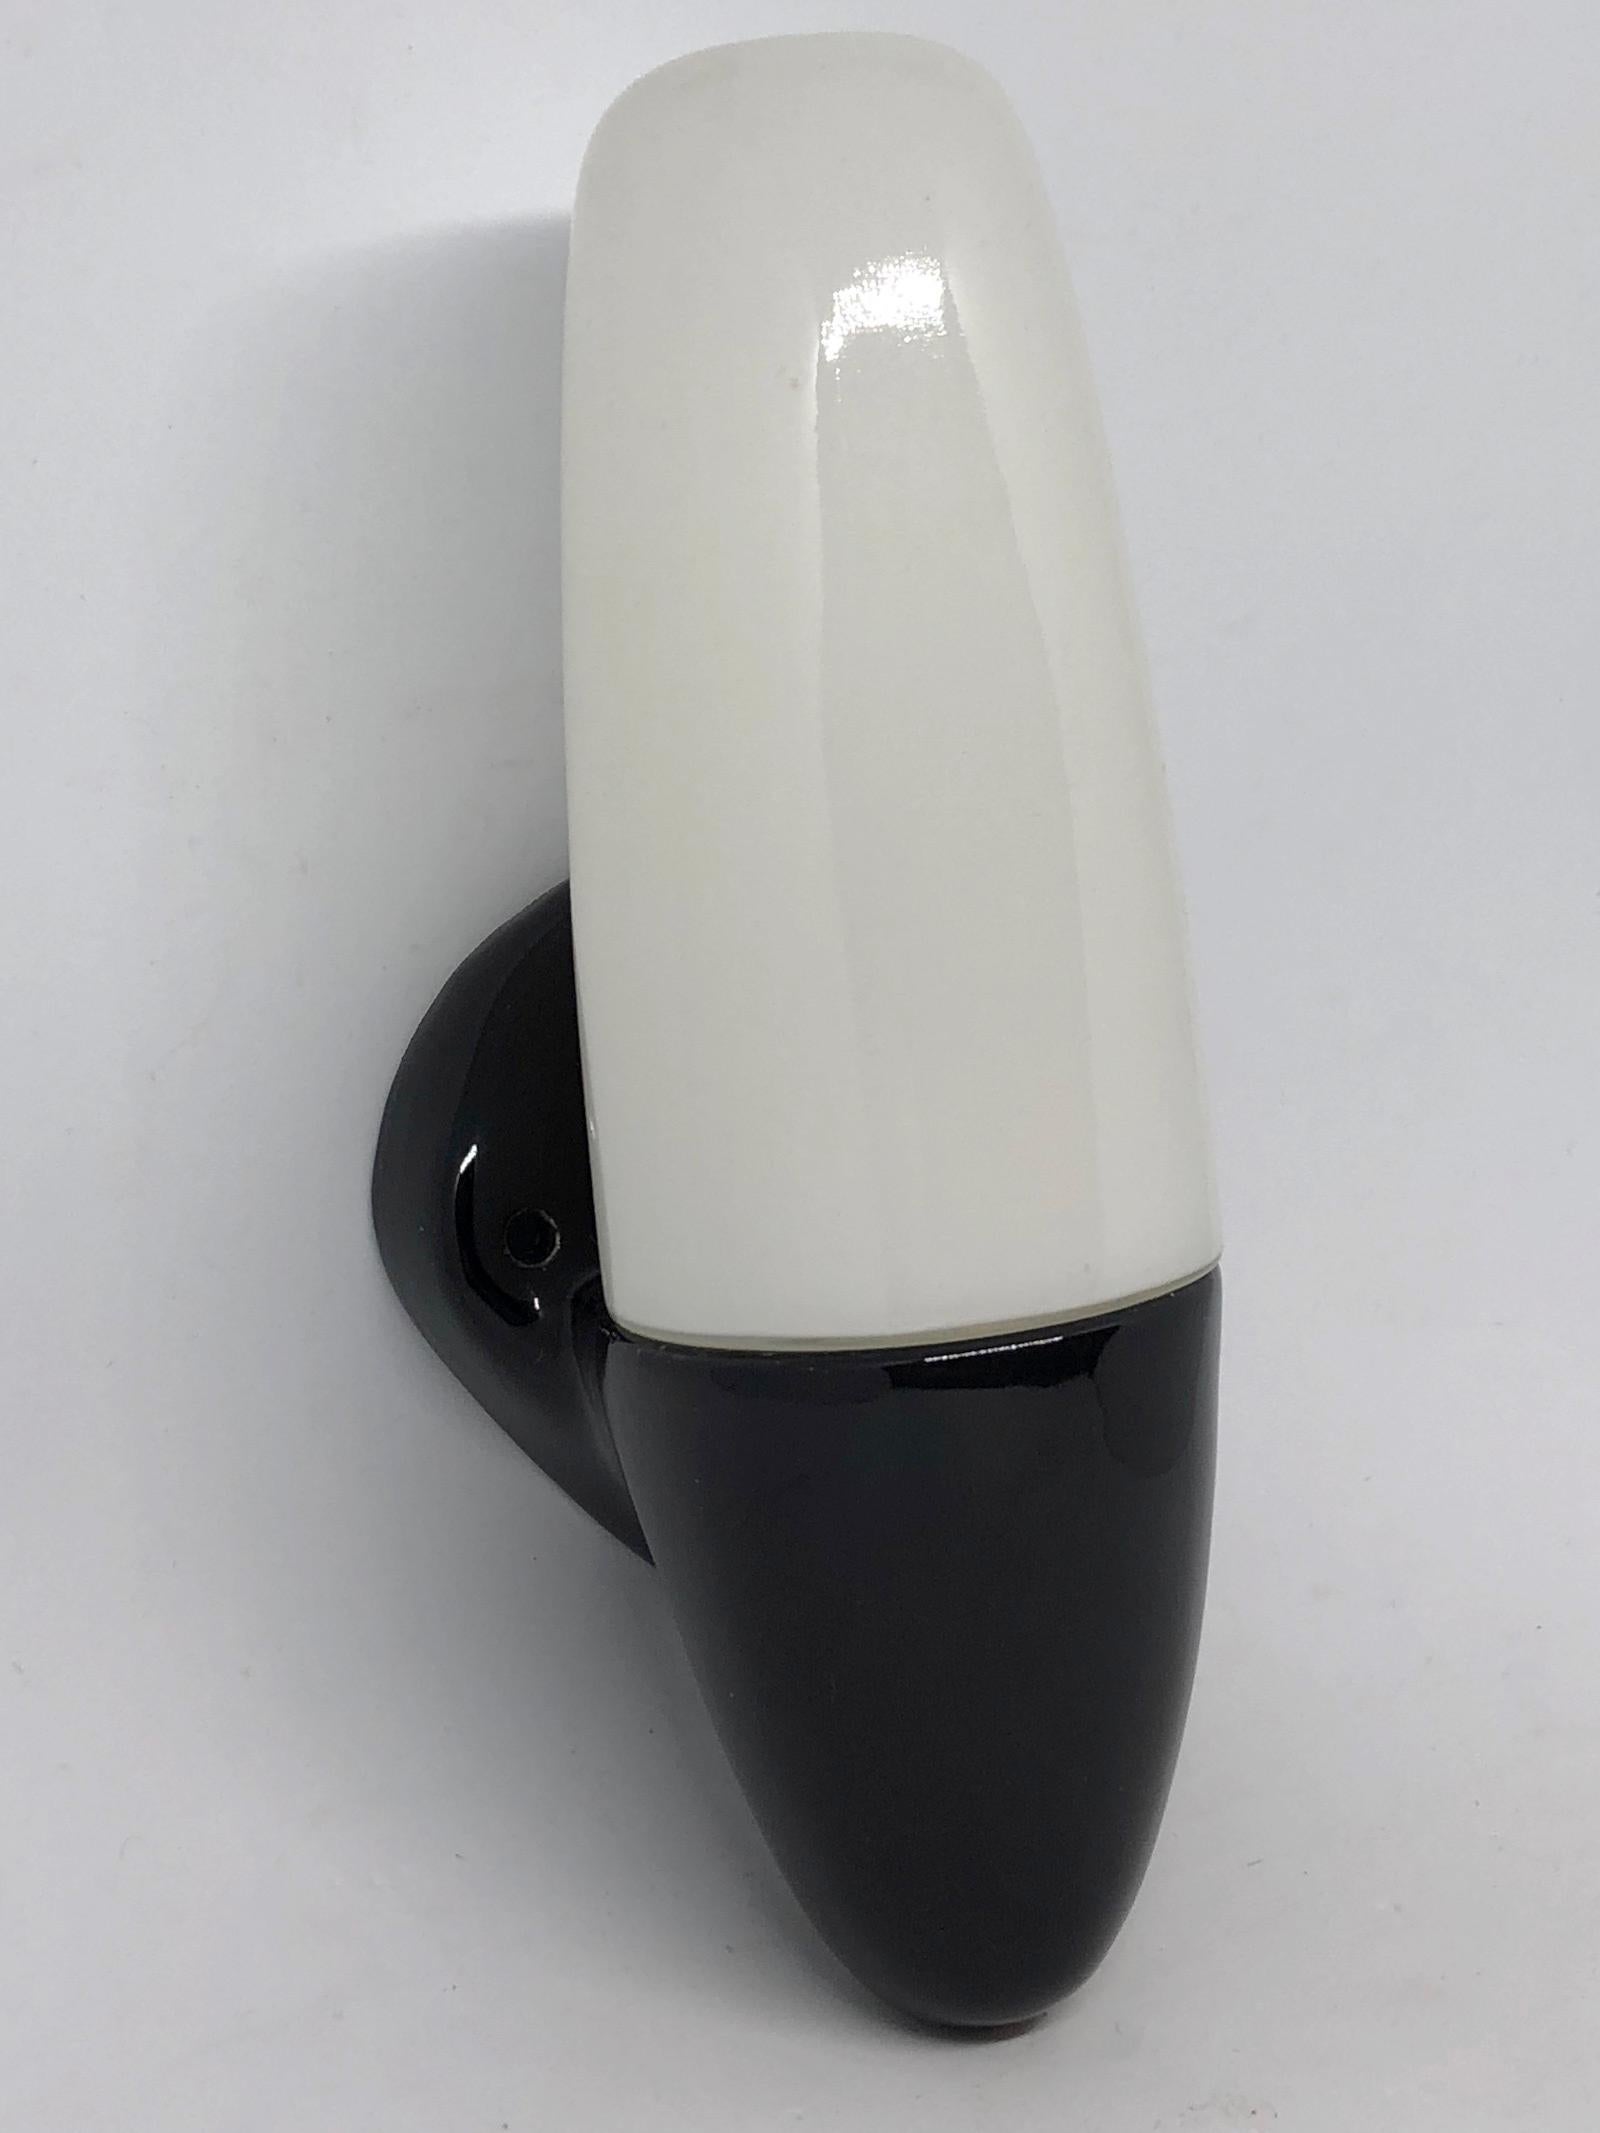 Bauhaus Wagenfeld Black and White Wall Sconce, Germany, 1950s For Sale 1